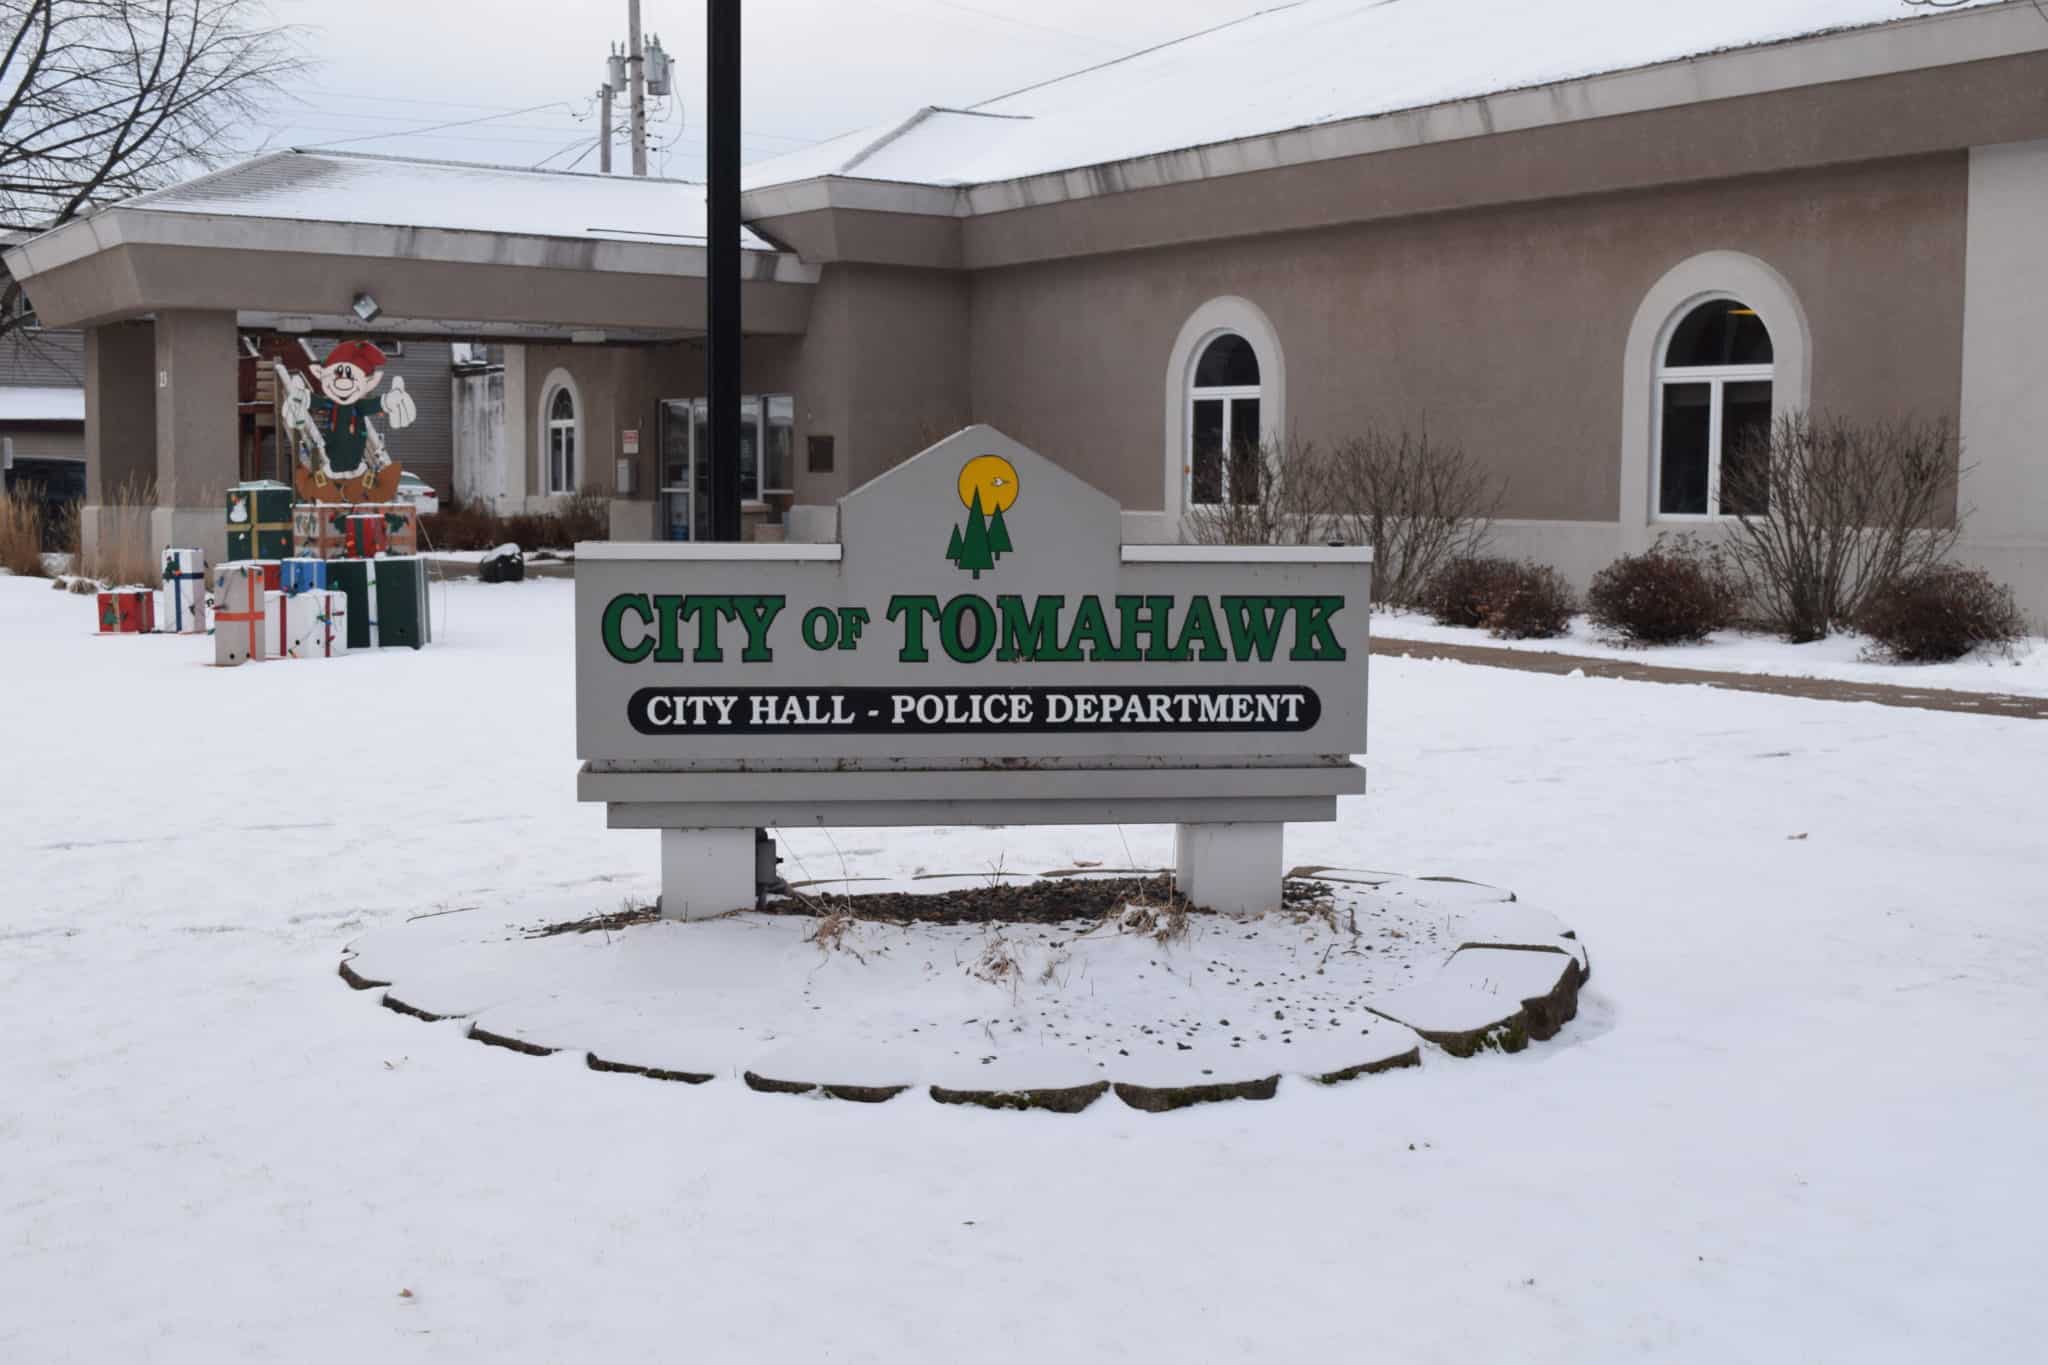 Lincoln County Veterans Service Office to hold office hours in Tomahawk this winter